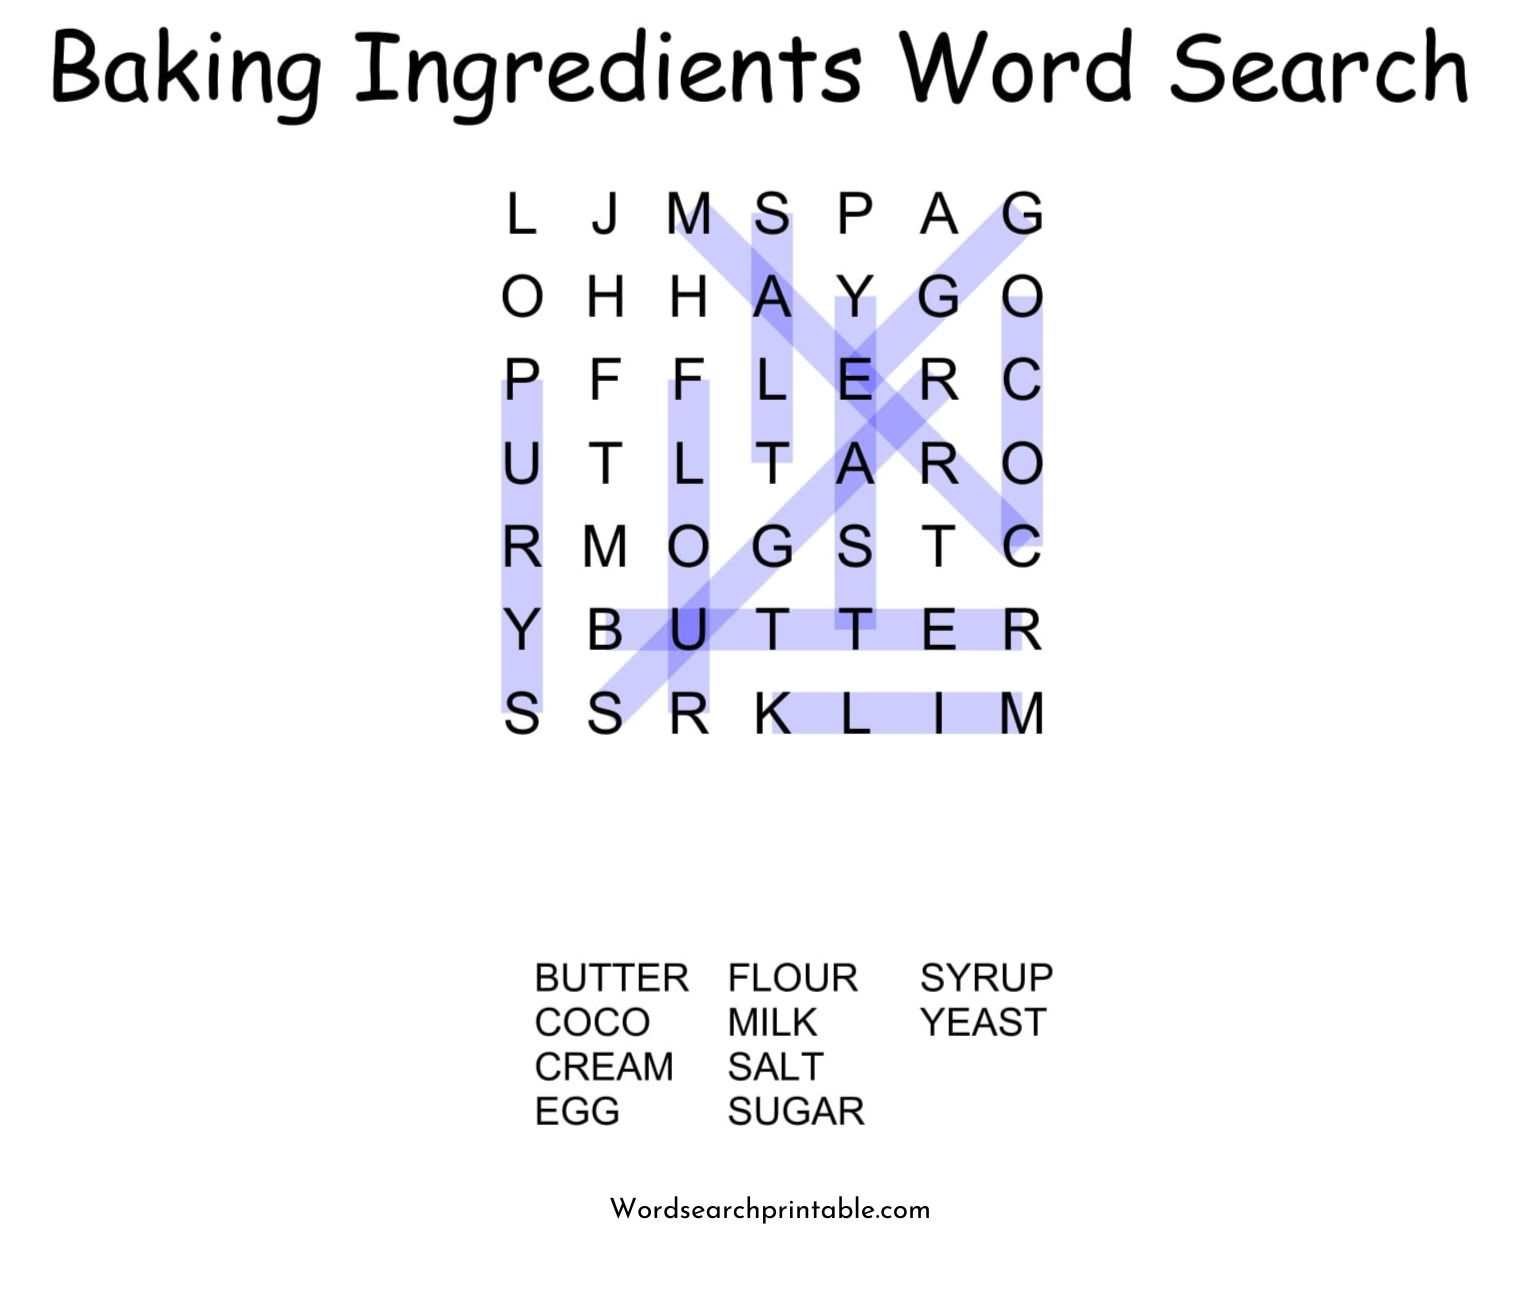 baking ingredients word search puzzle solution